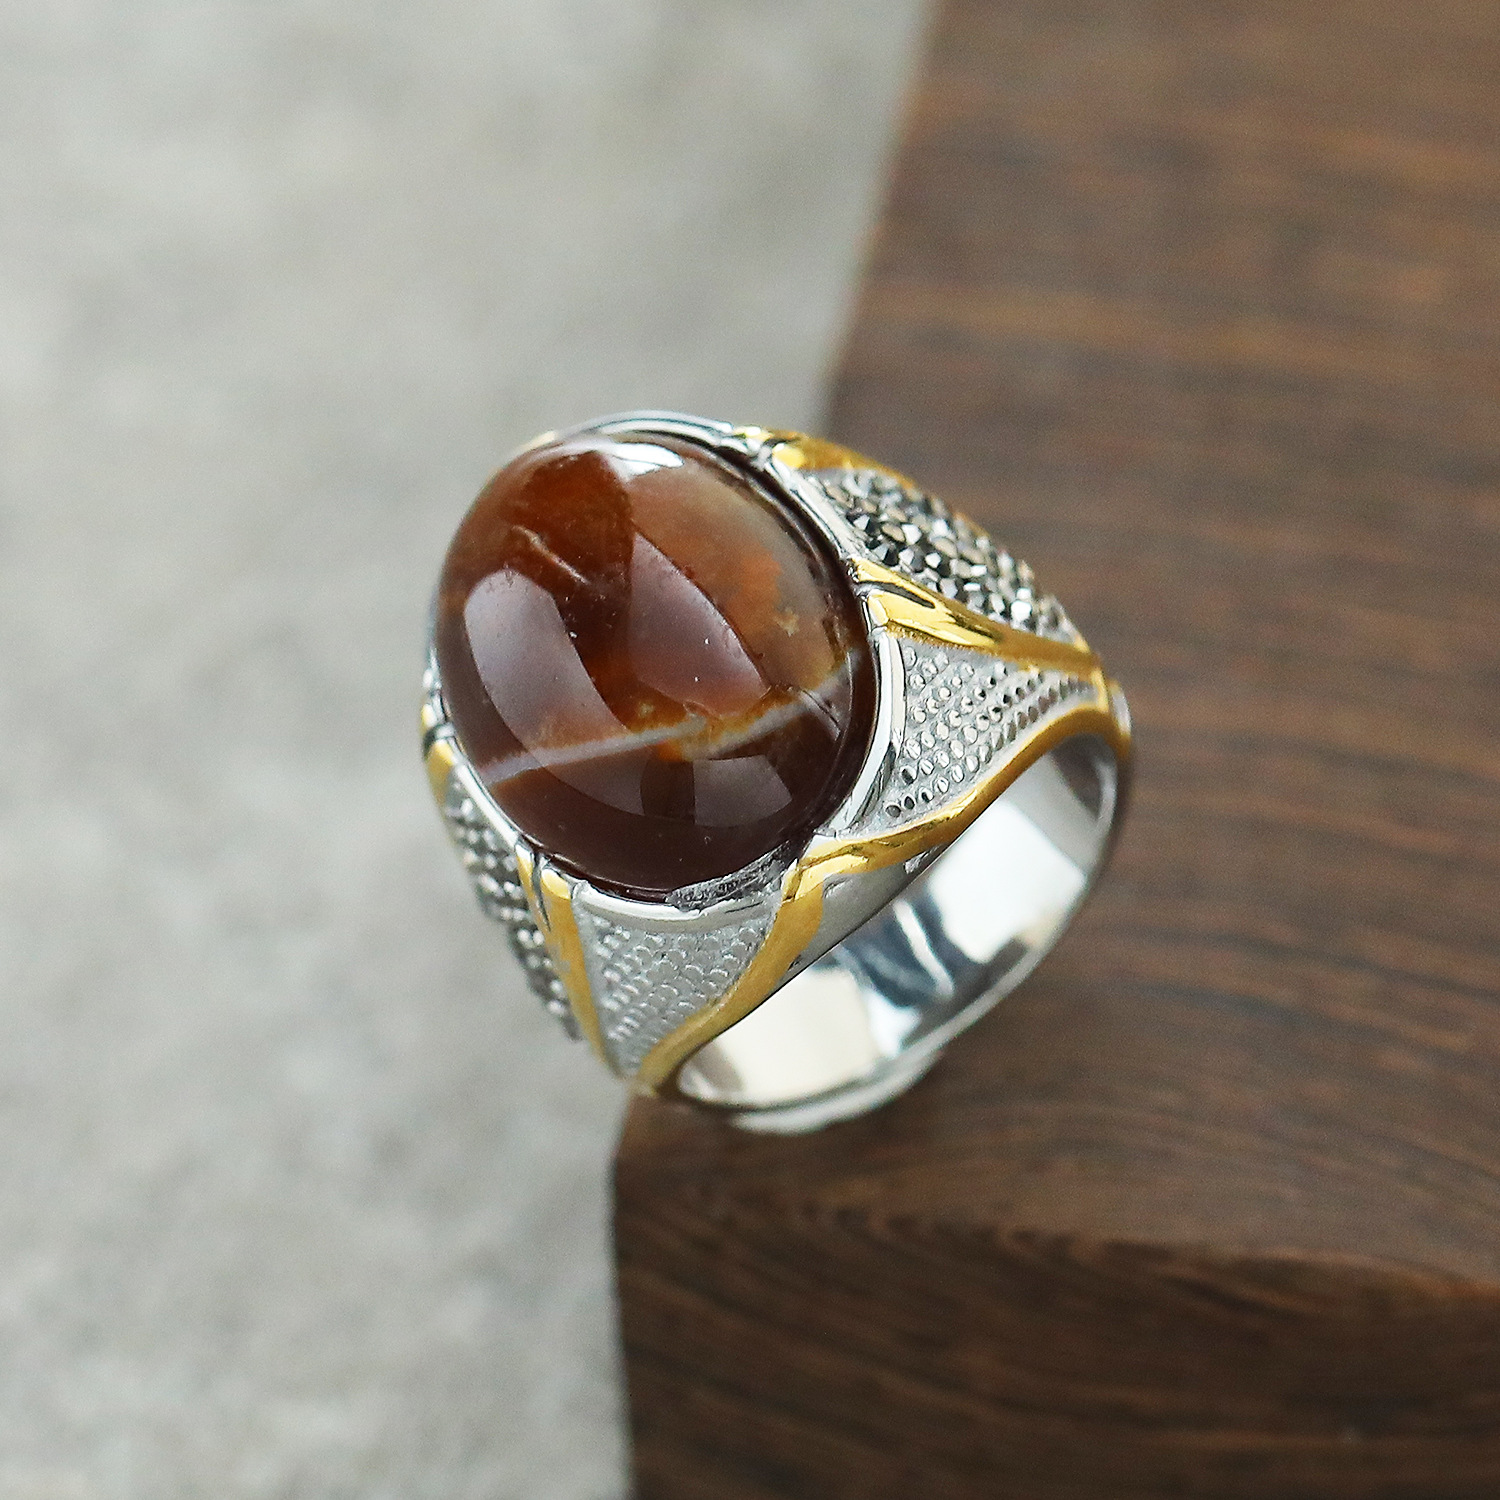 27:Steel color and gold agate